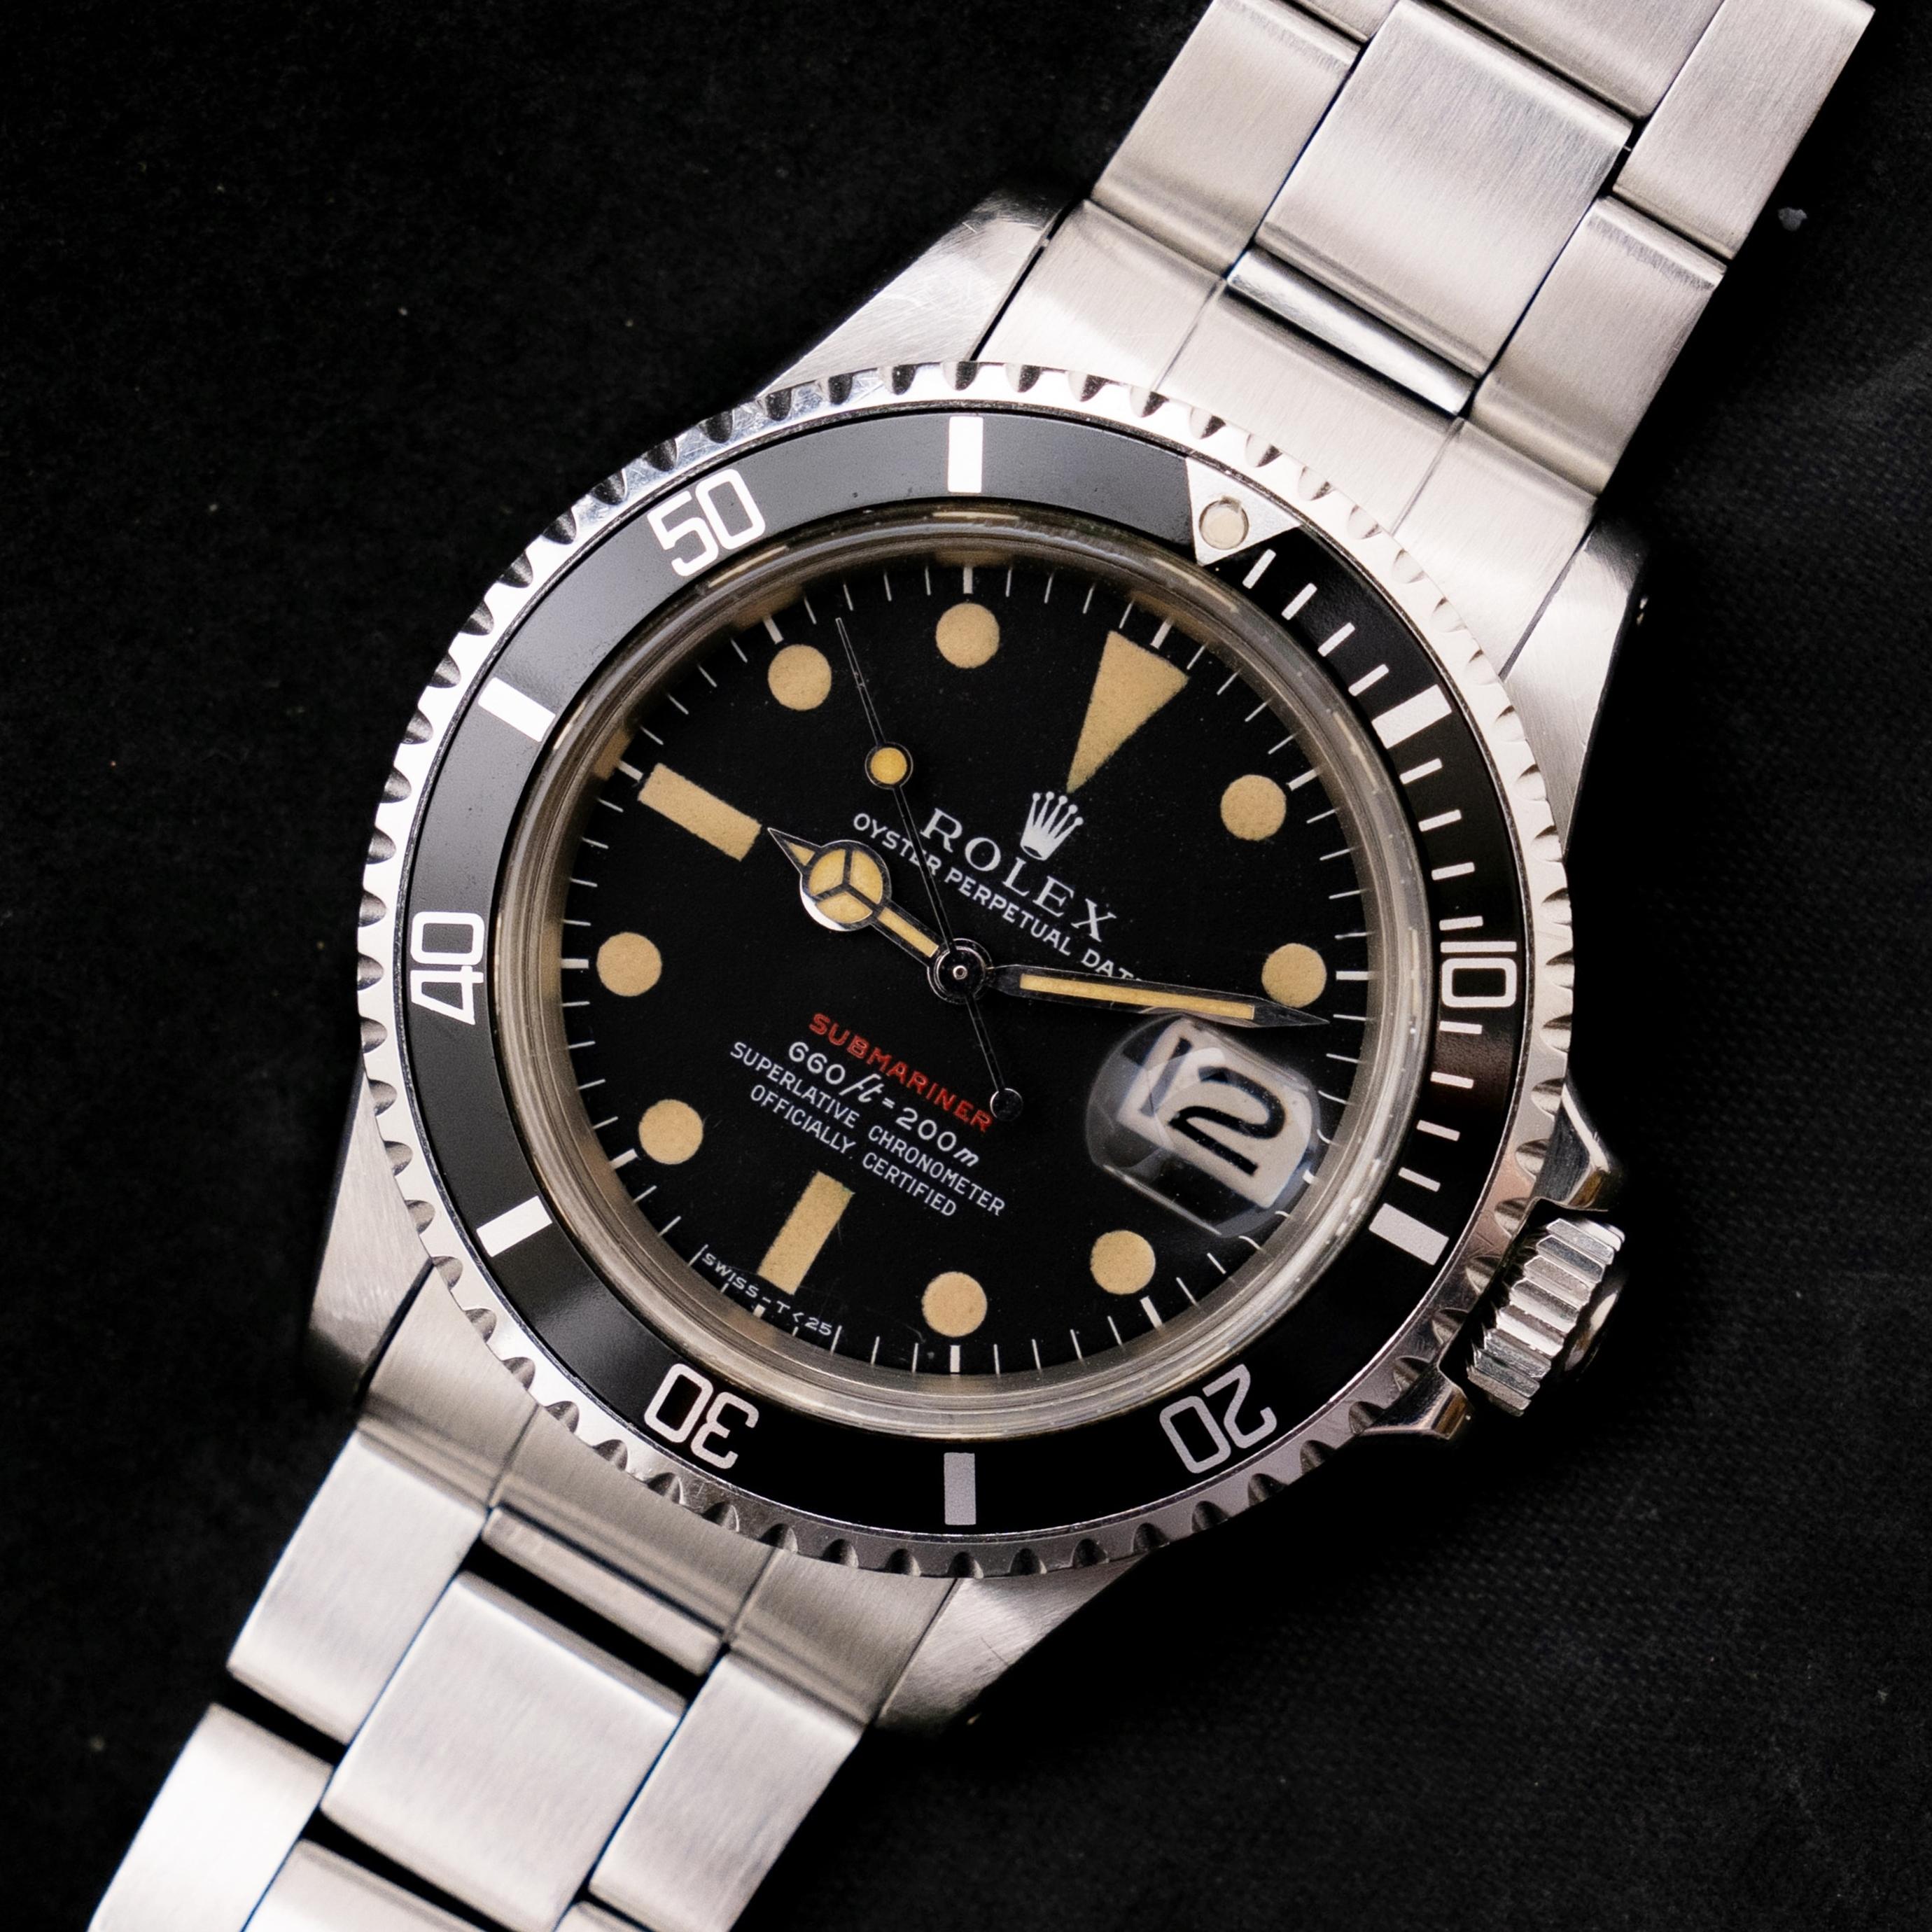 Brand: Vintage Rolex
Model: 1680
Year: 1970
Serial number: 29xxxxx
Reference: C03865

Case: Show sign of wear with slight polish from previous; inner case back stamped 1680 IV.70

Dial: Excellent Aged Condition Tritium Dial where the lumes have